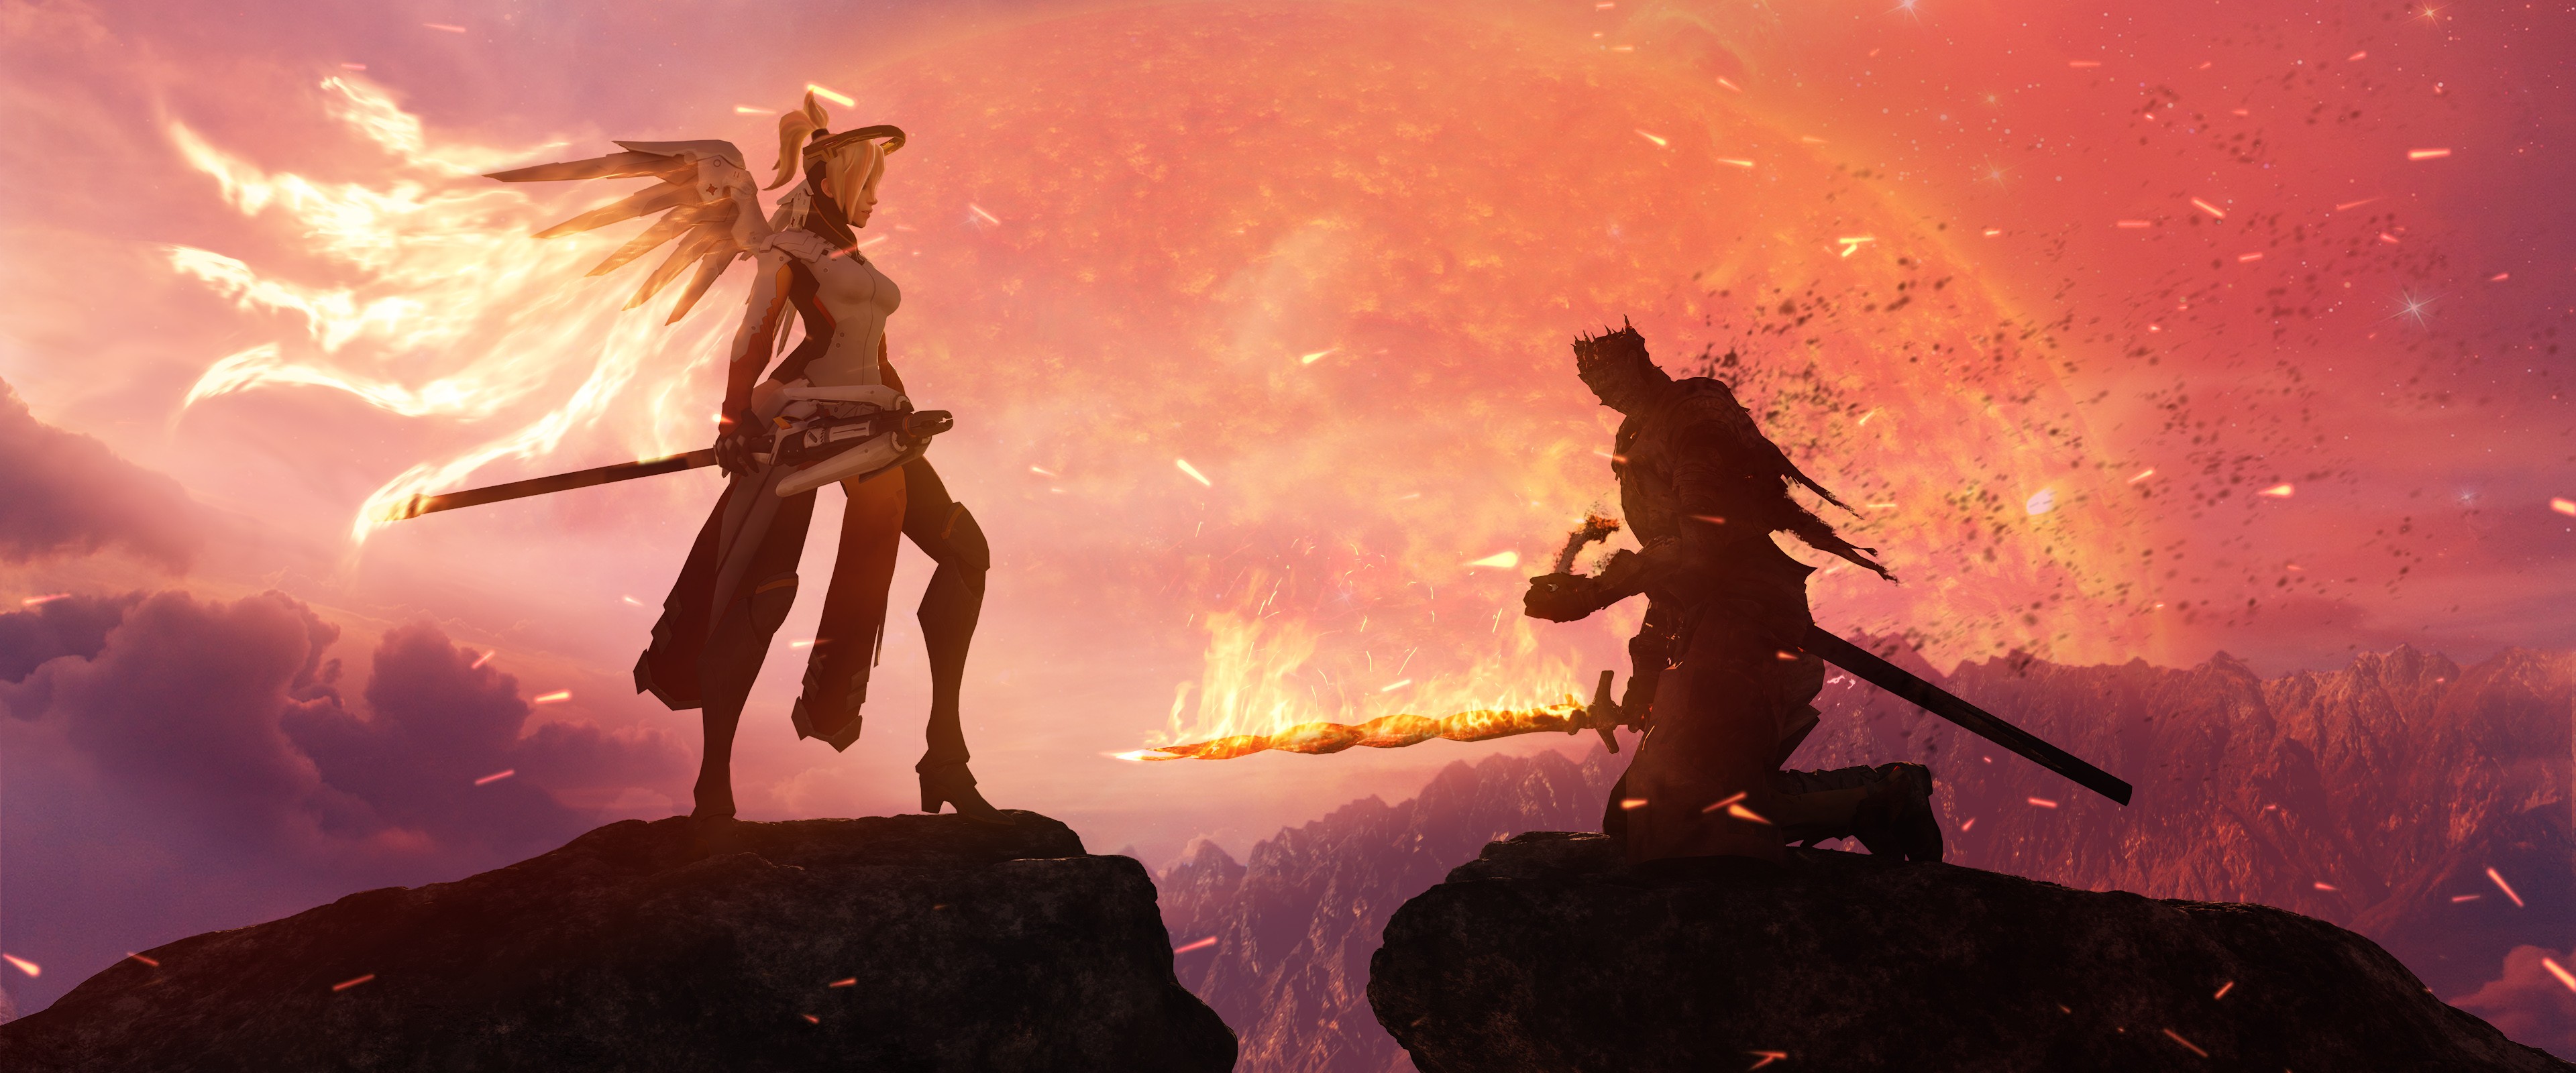 General 3840x1600 crossover Overwatch Dark Souls Mercy (Overwatch) From Software video games DeviantArt fantasy men sword fire fantasy girl wings video game girls PC gaming